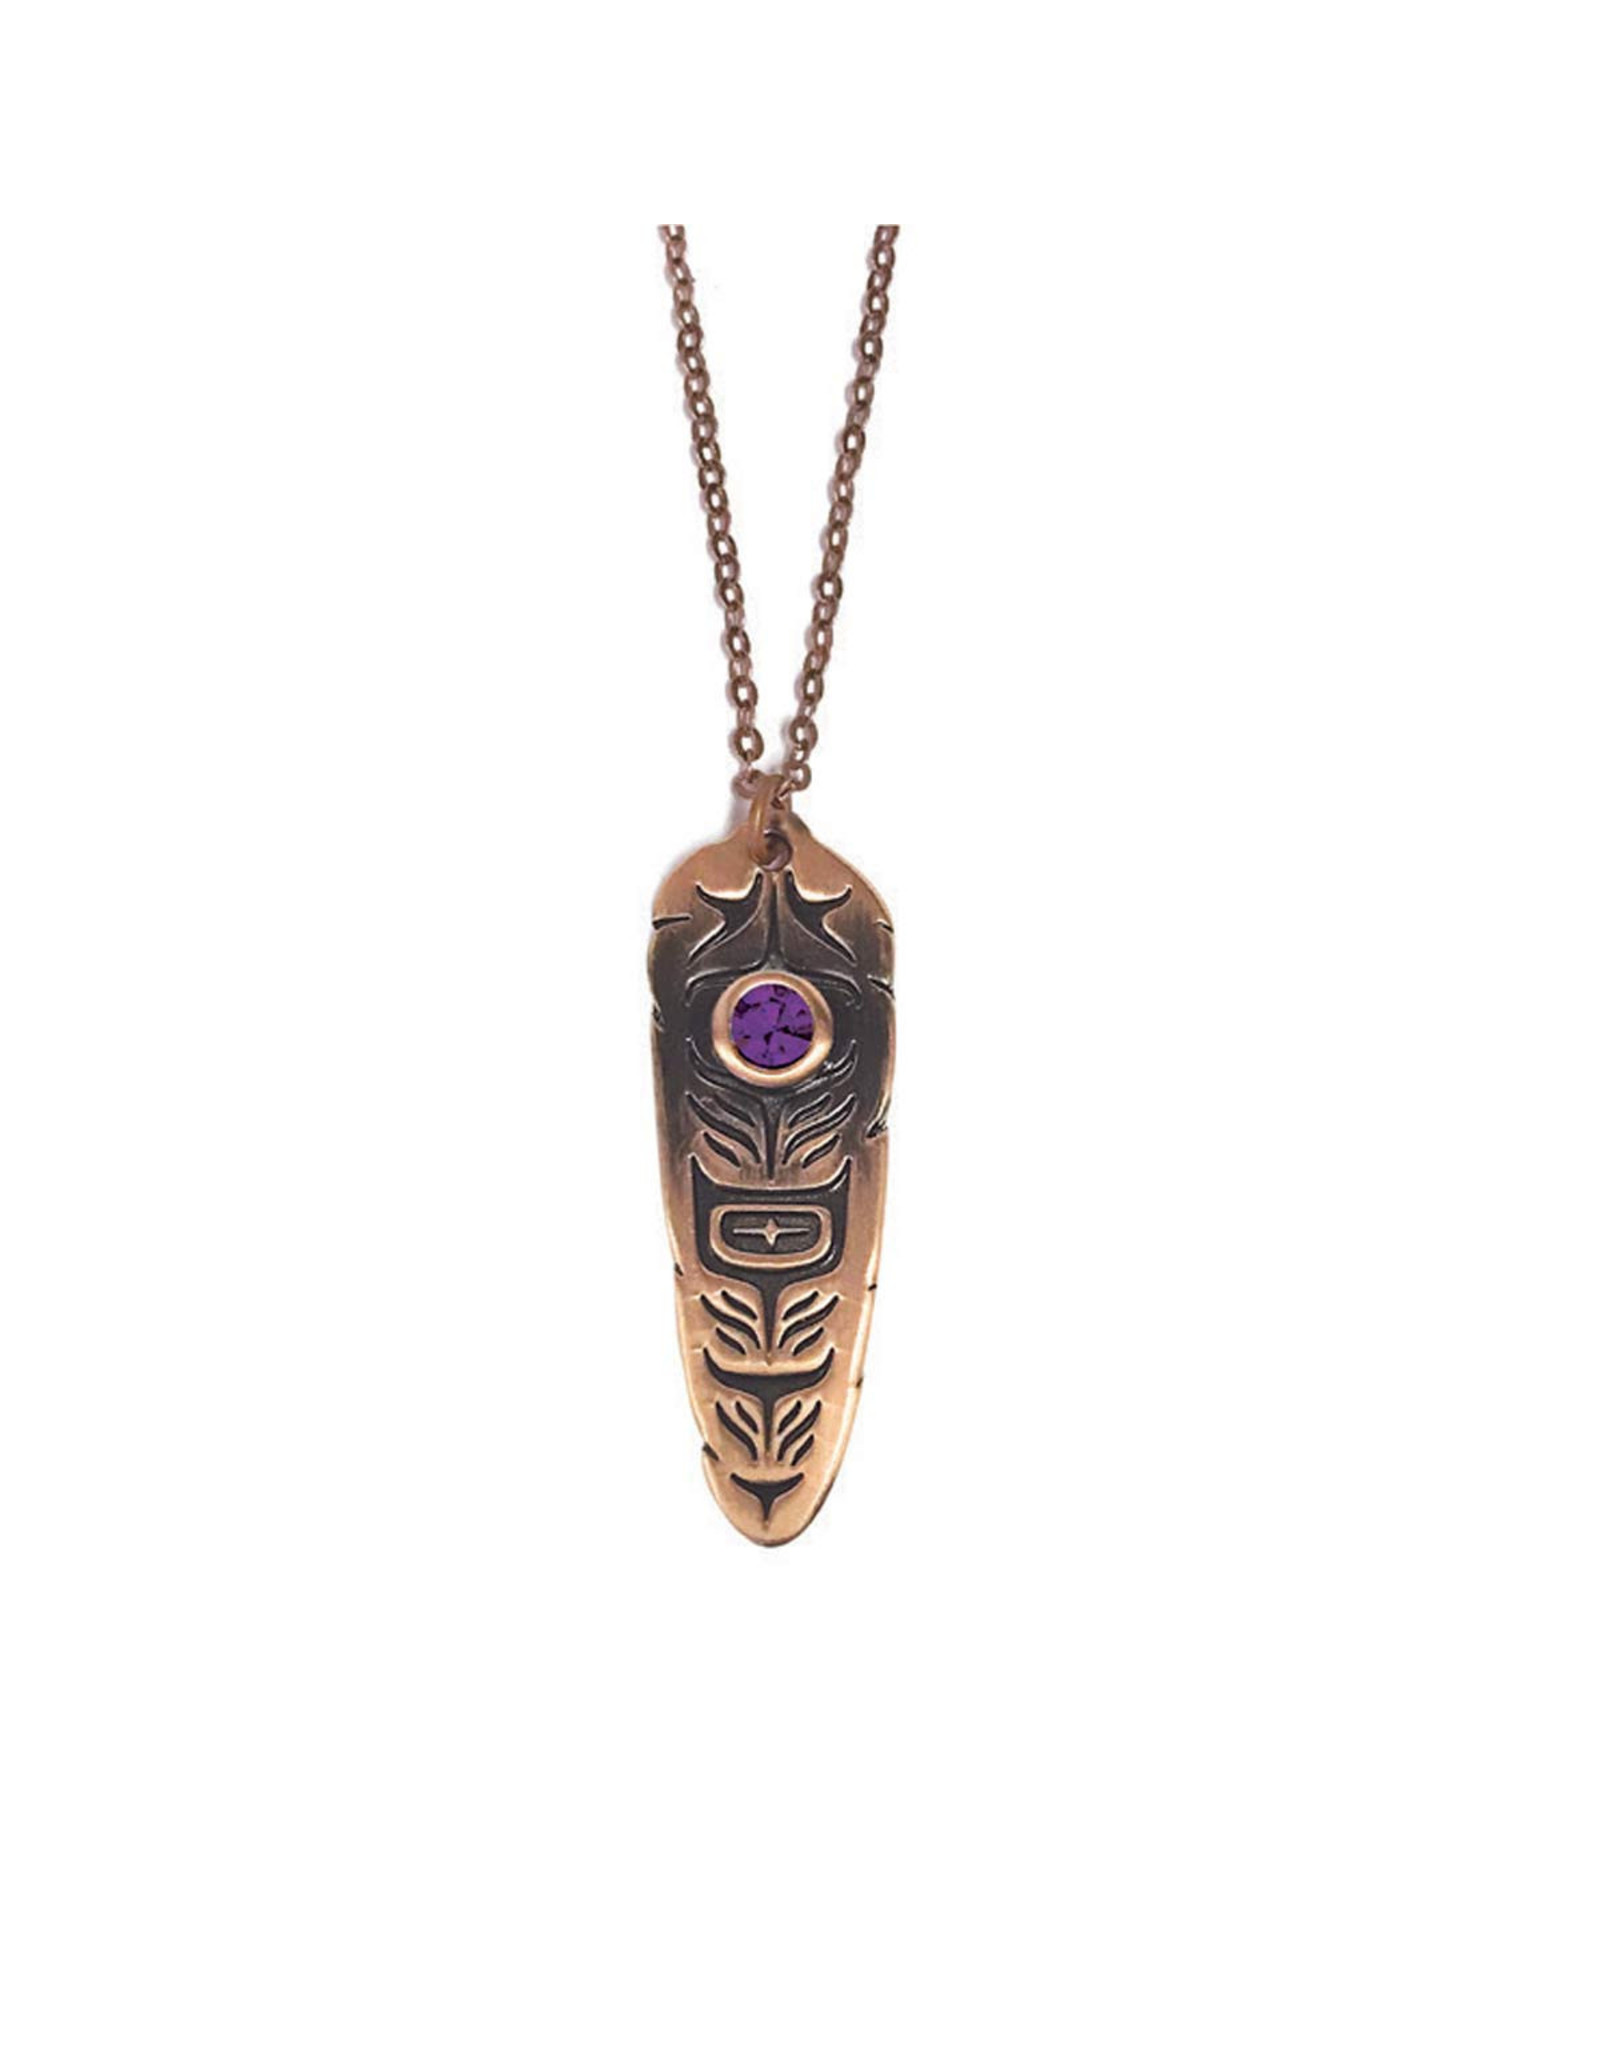 Sacred Feather Necklace (Amethyst) SFN15